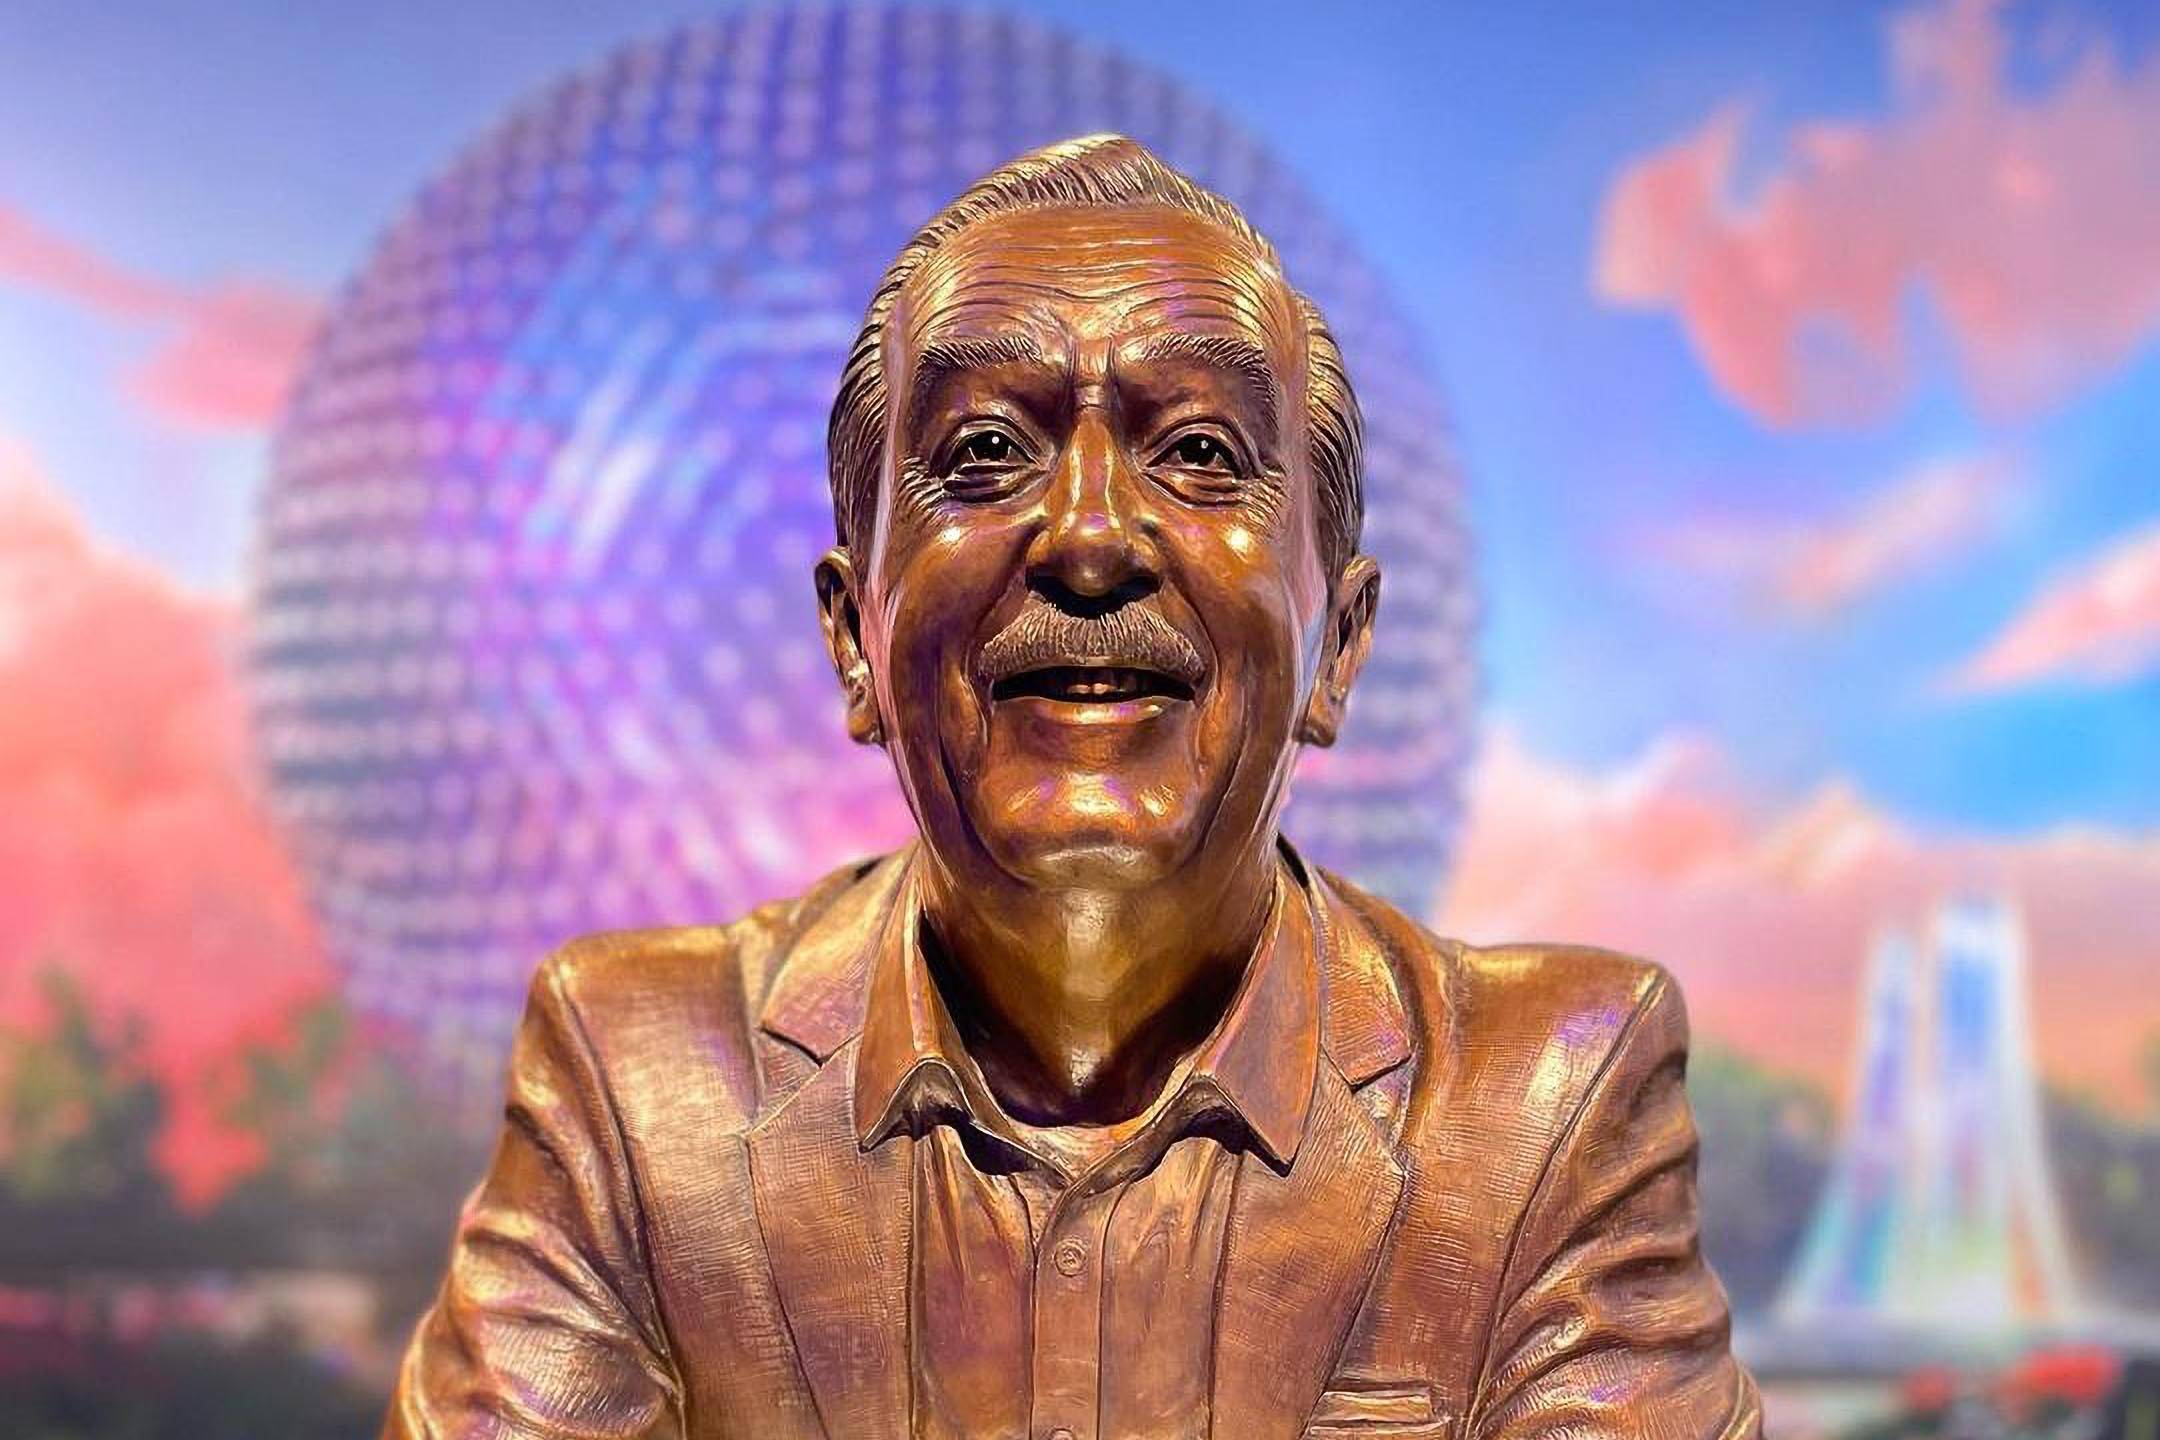 First look at the completed 'Walt the Dreamer' statue coming to EPCOT